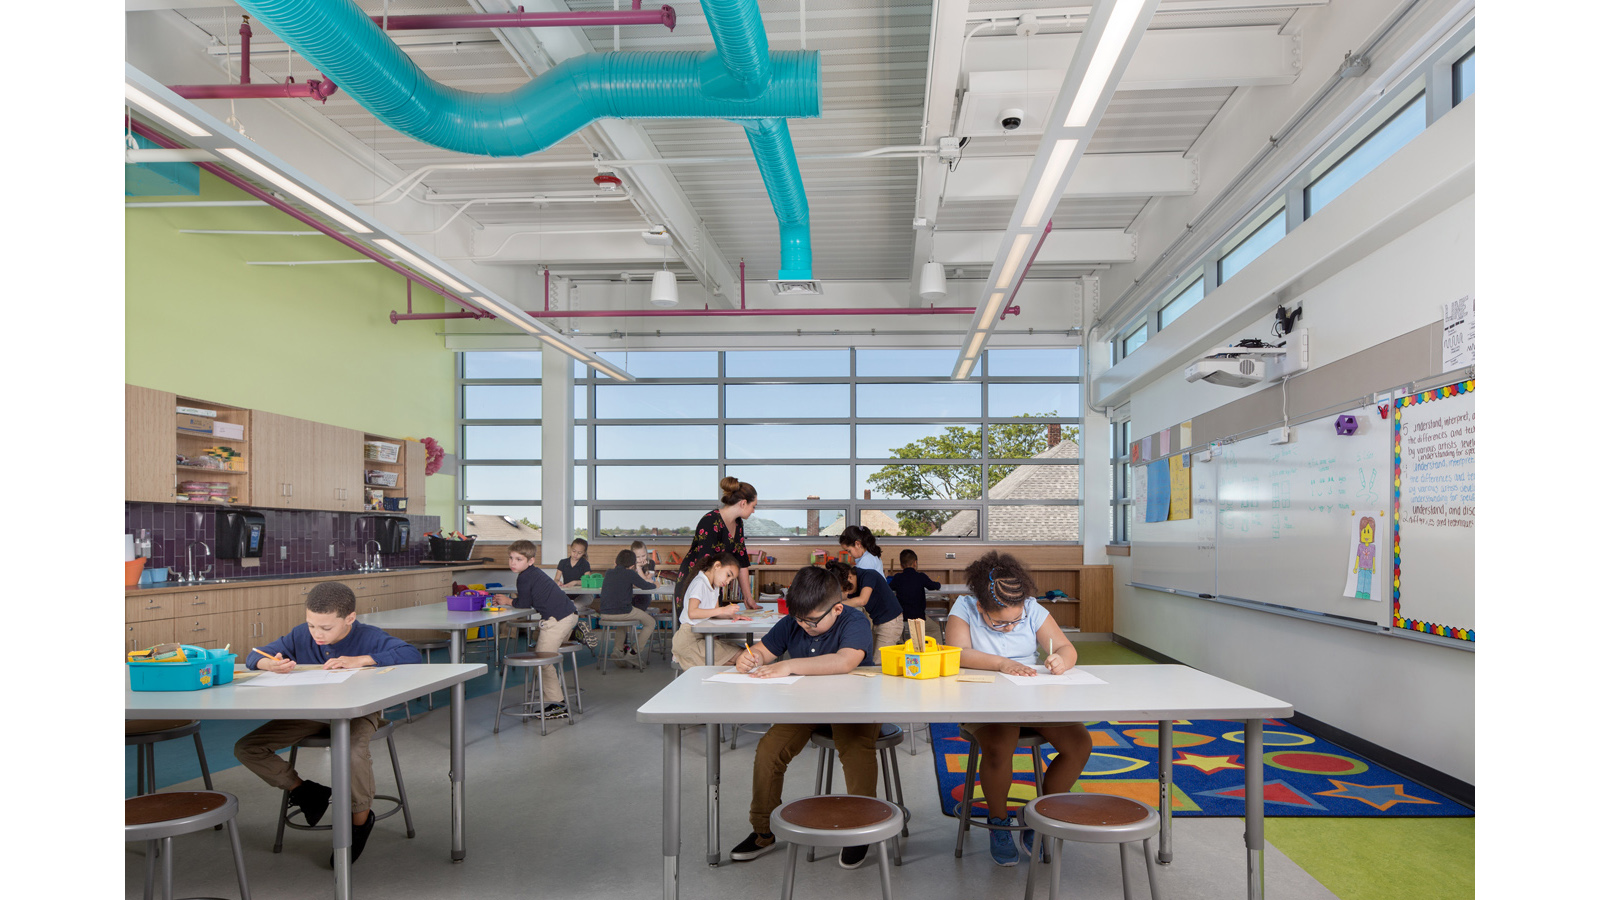 Irwin Jacobs Elementary School Interior, classroom building, colorful HVAC ducts are visible